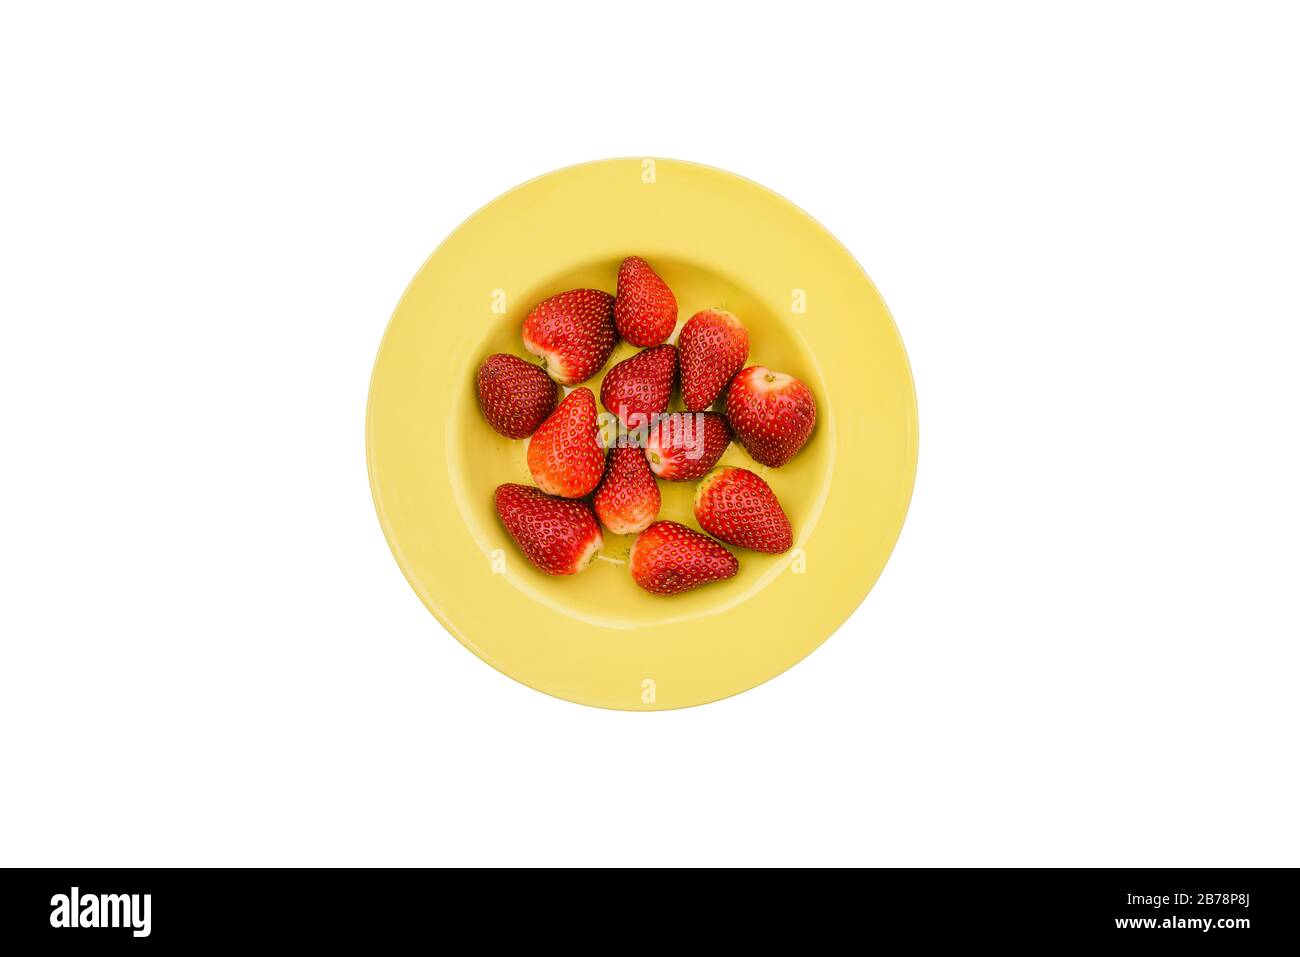 Strawberries in a yellow round plate. Red summer berries isolated on a white background. Flat lay, top view Stock Photo